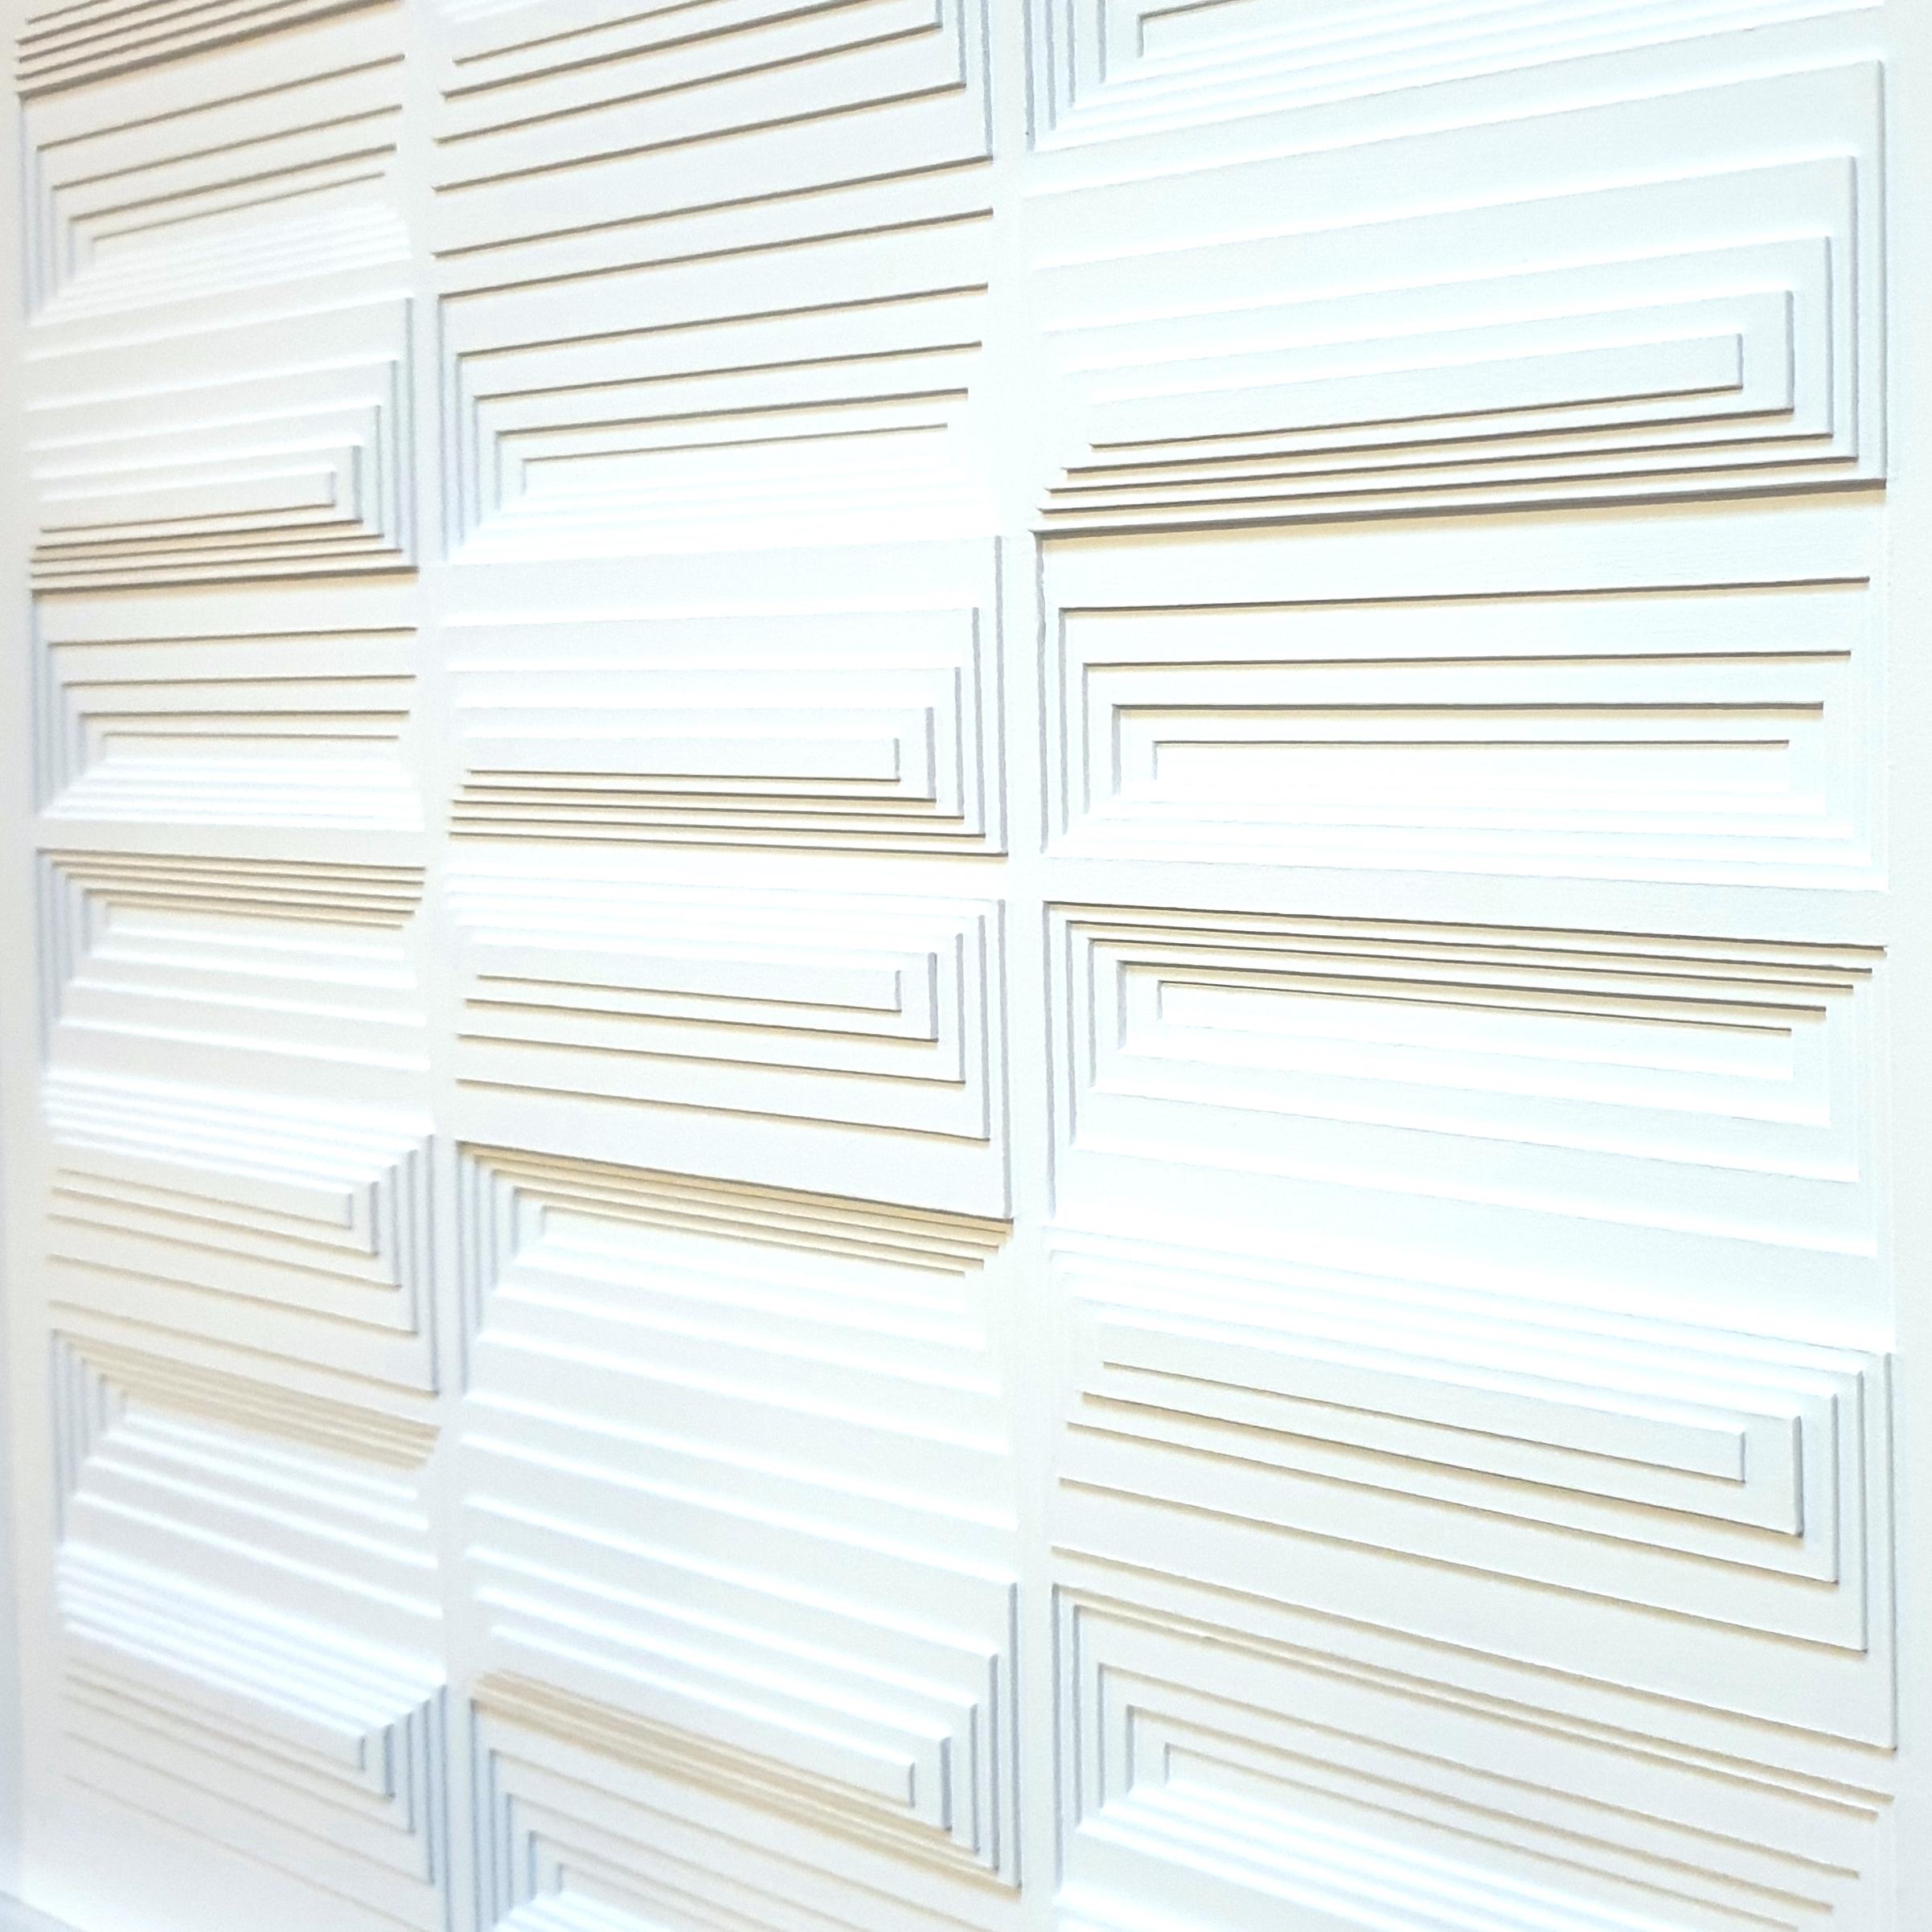 BB1219 is a unique one-of-a-kind contemporary modern painting relief by Dutch artist Eef de Graaf. The relief is made from meticulously hand cut cardboard elements finished with a matt white acrylic paint. This art work is mounted in a simple white